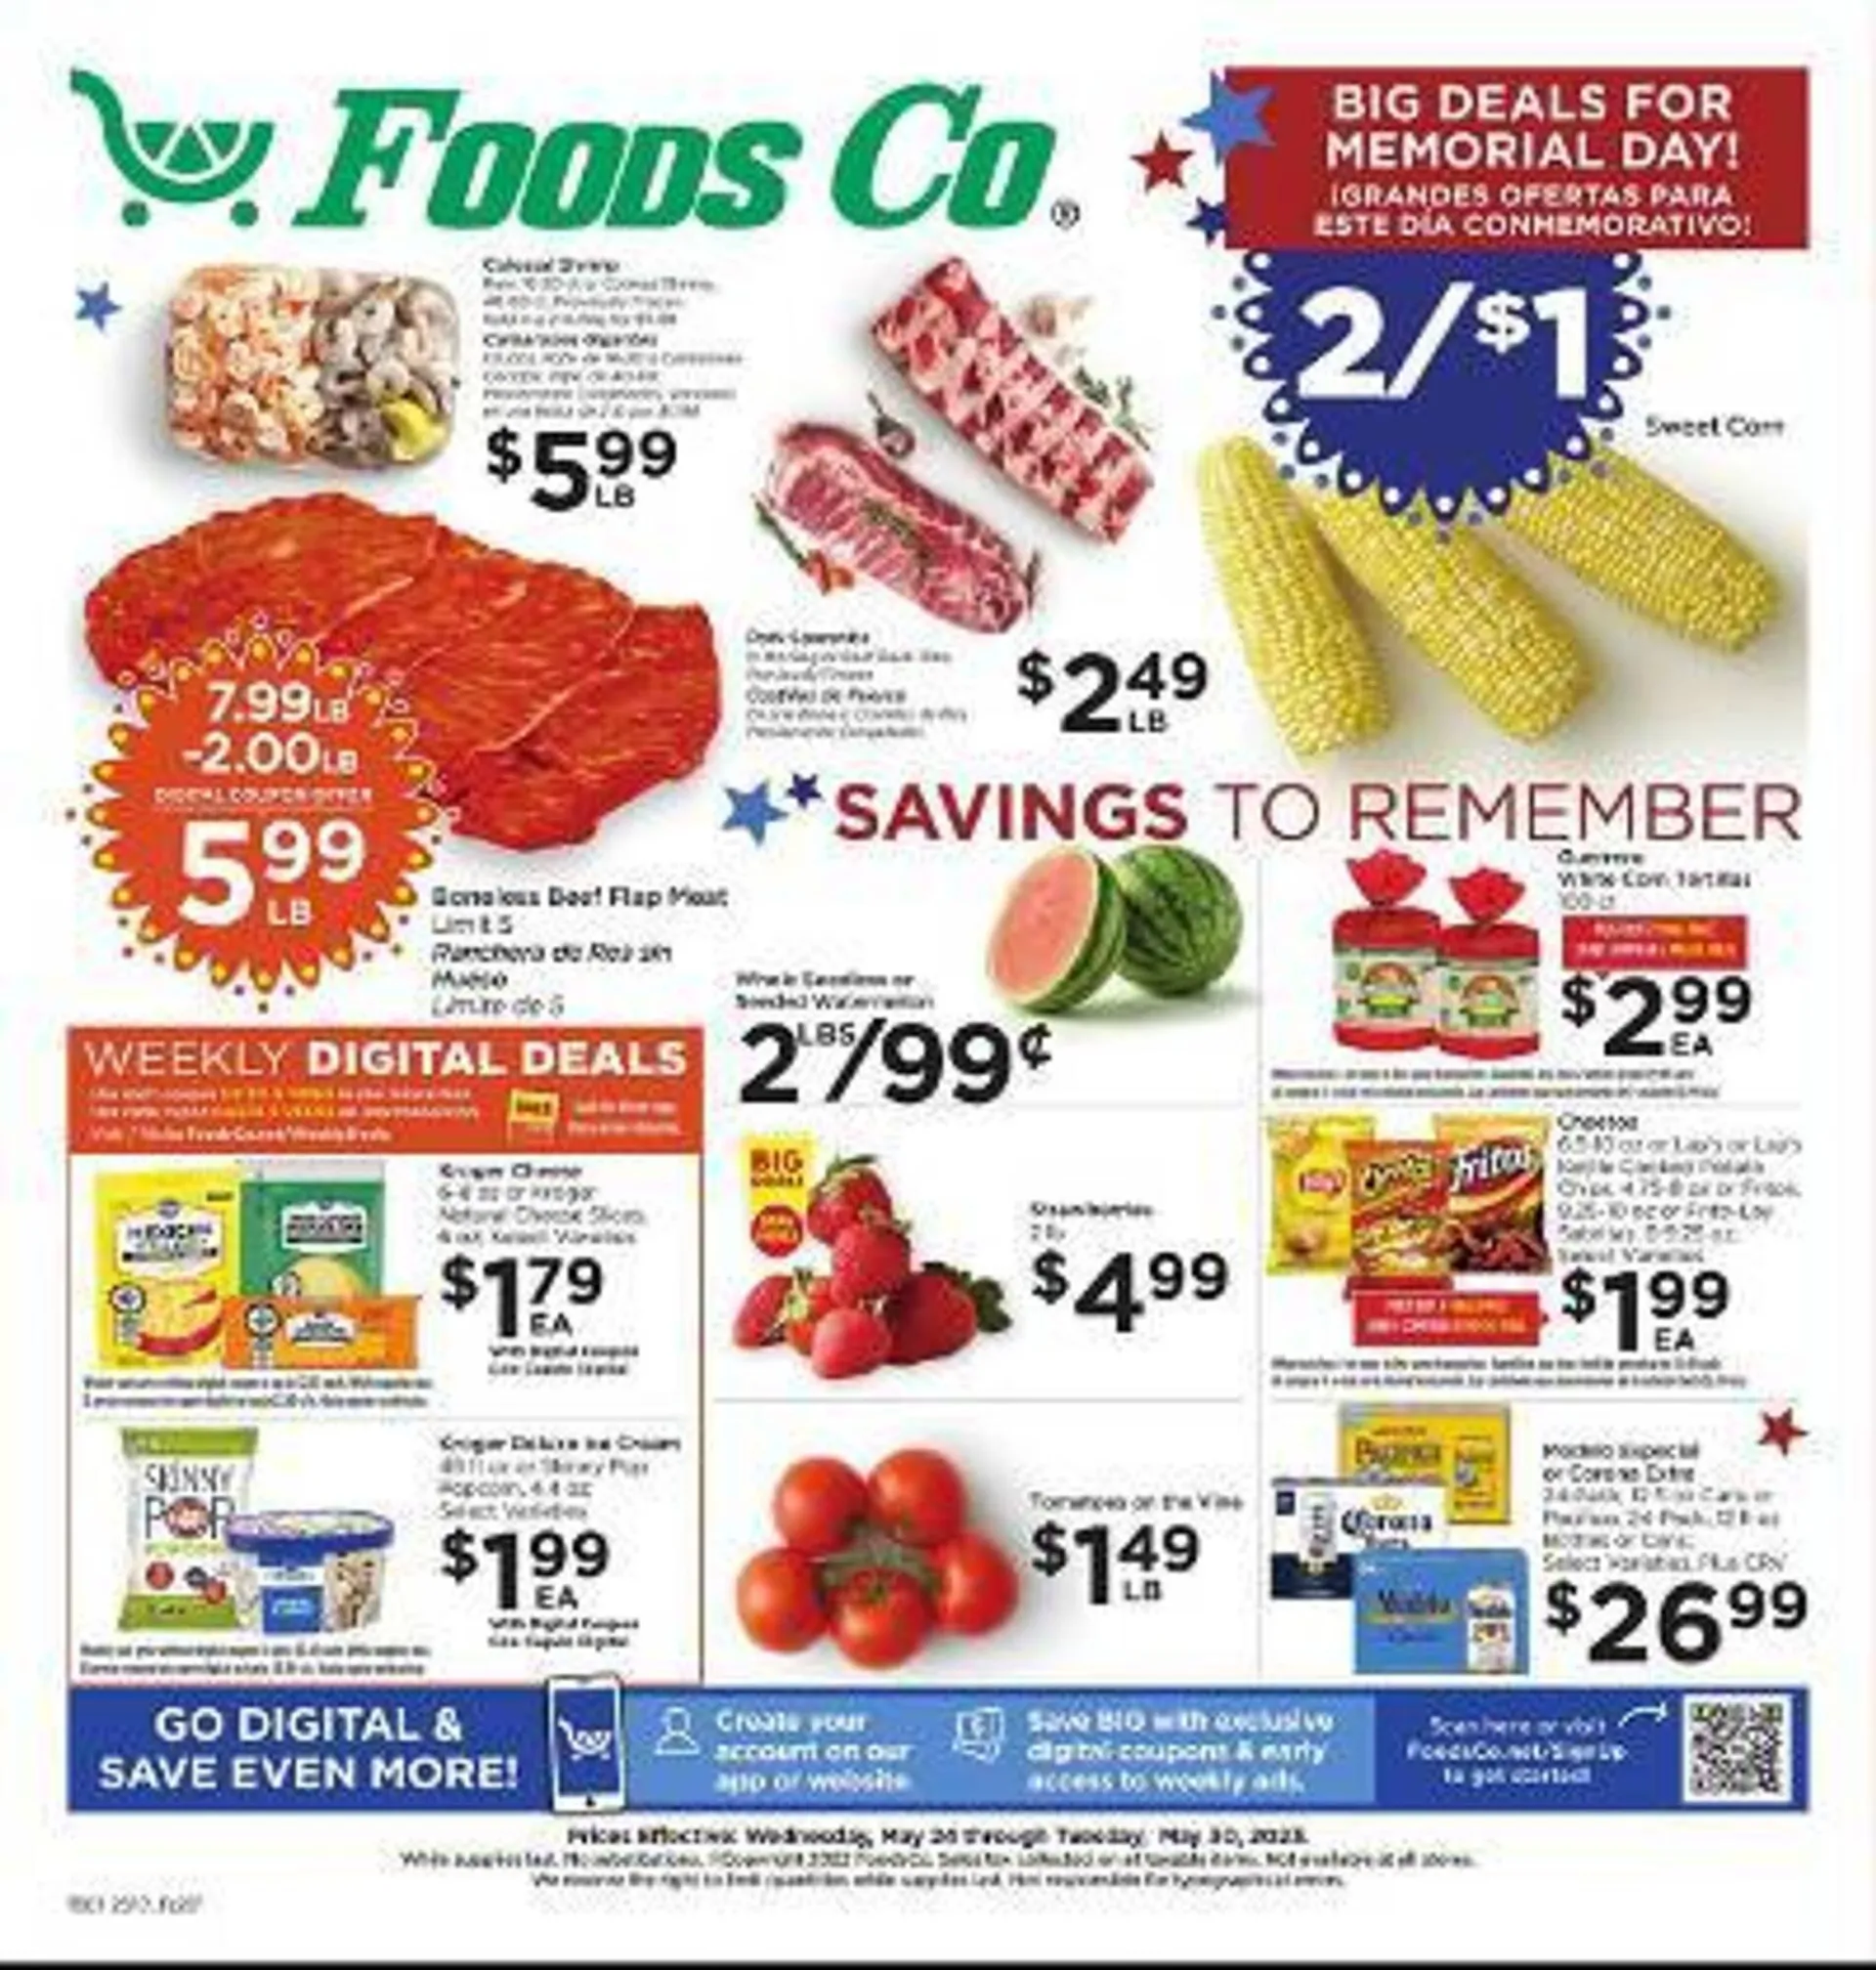 Foods Co ad - 1